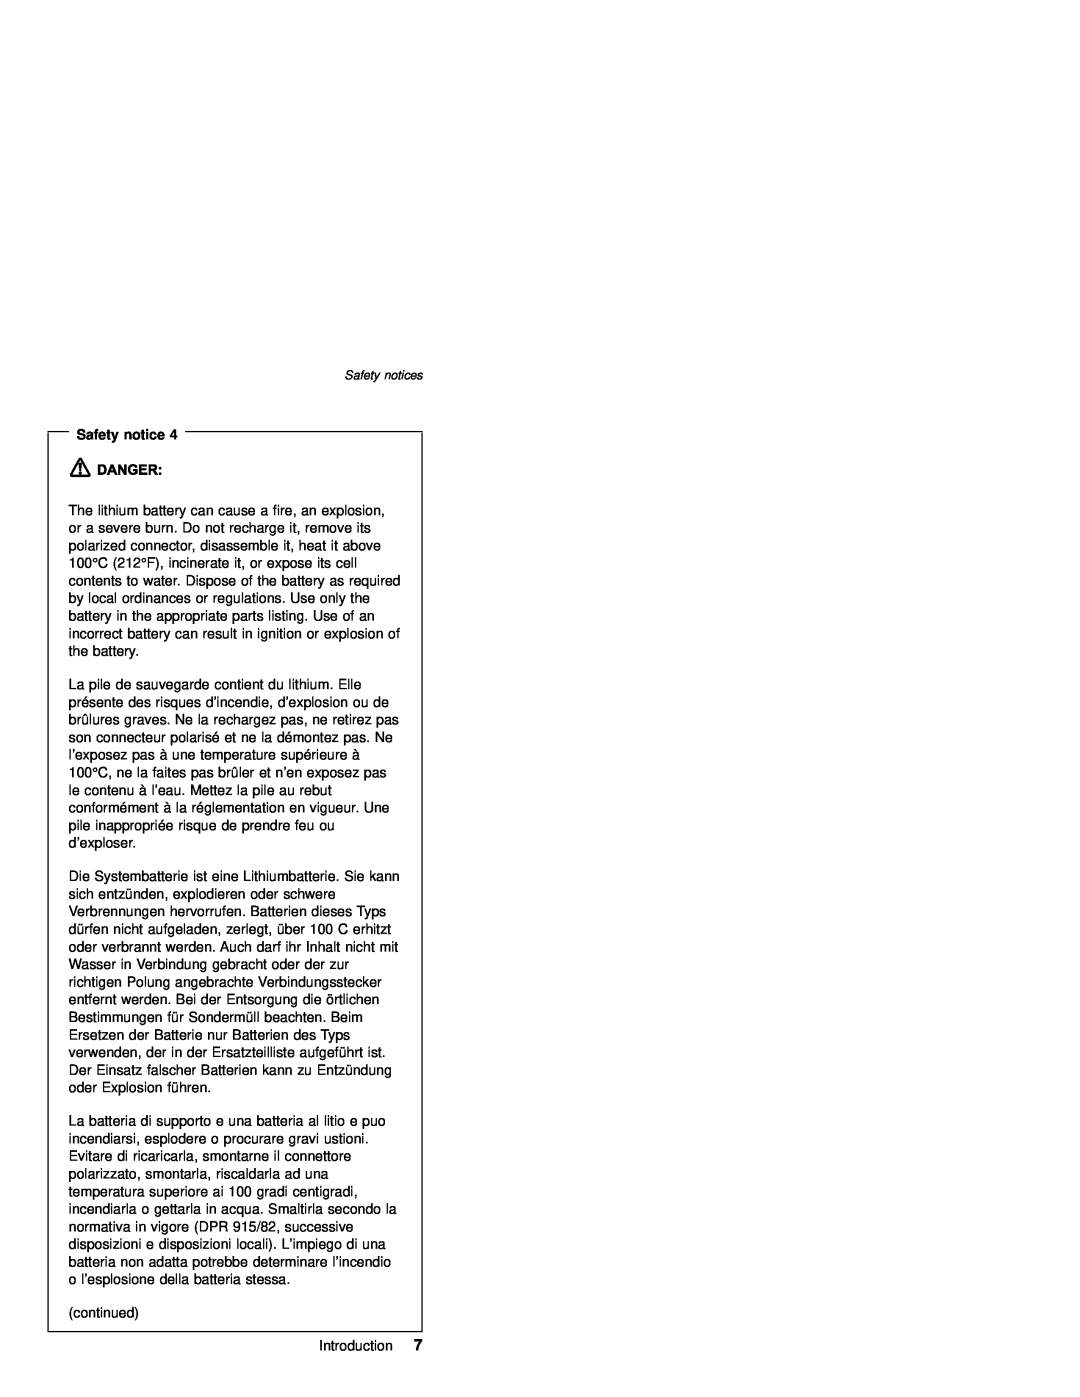 IBM MT 2632 manual Safety notice, continued Introduction 